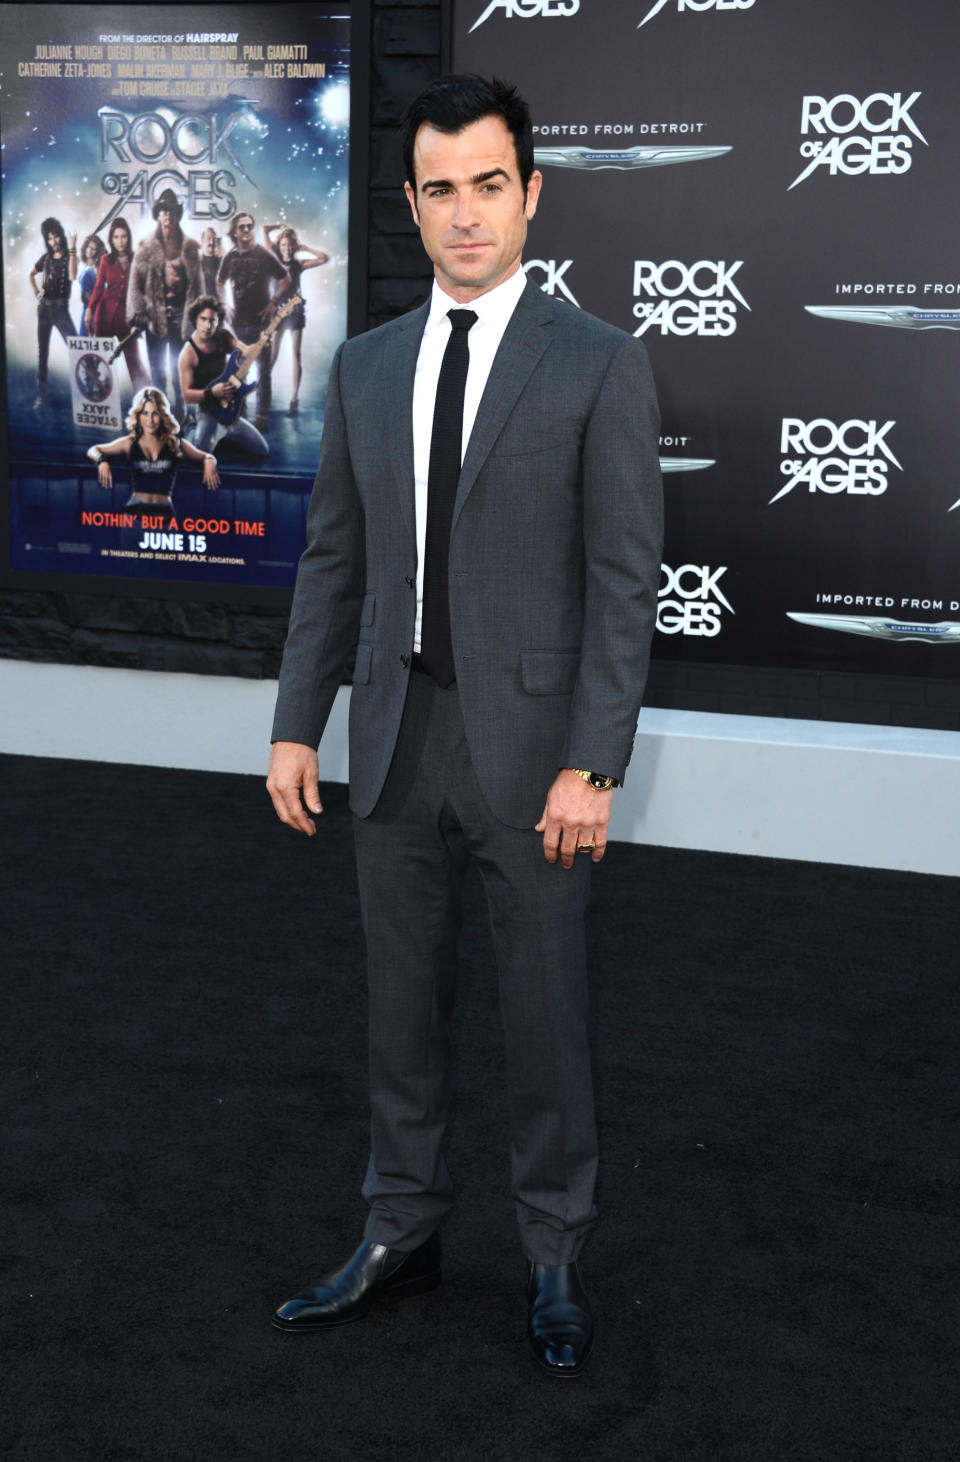 Premiere Of Warner Bros. Pictures' "Rock Of Ages" - Arrivals